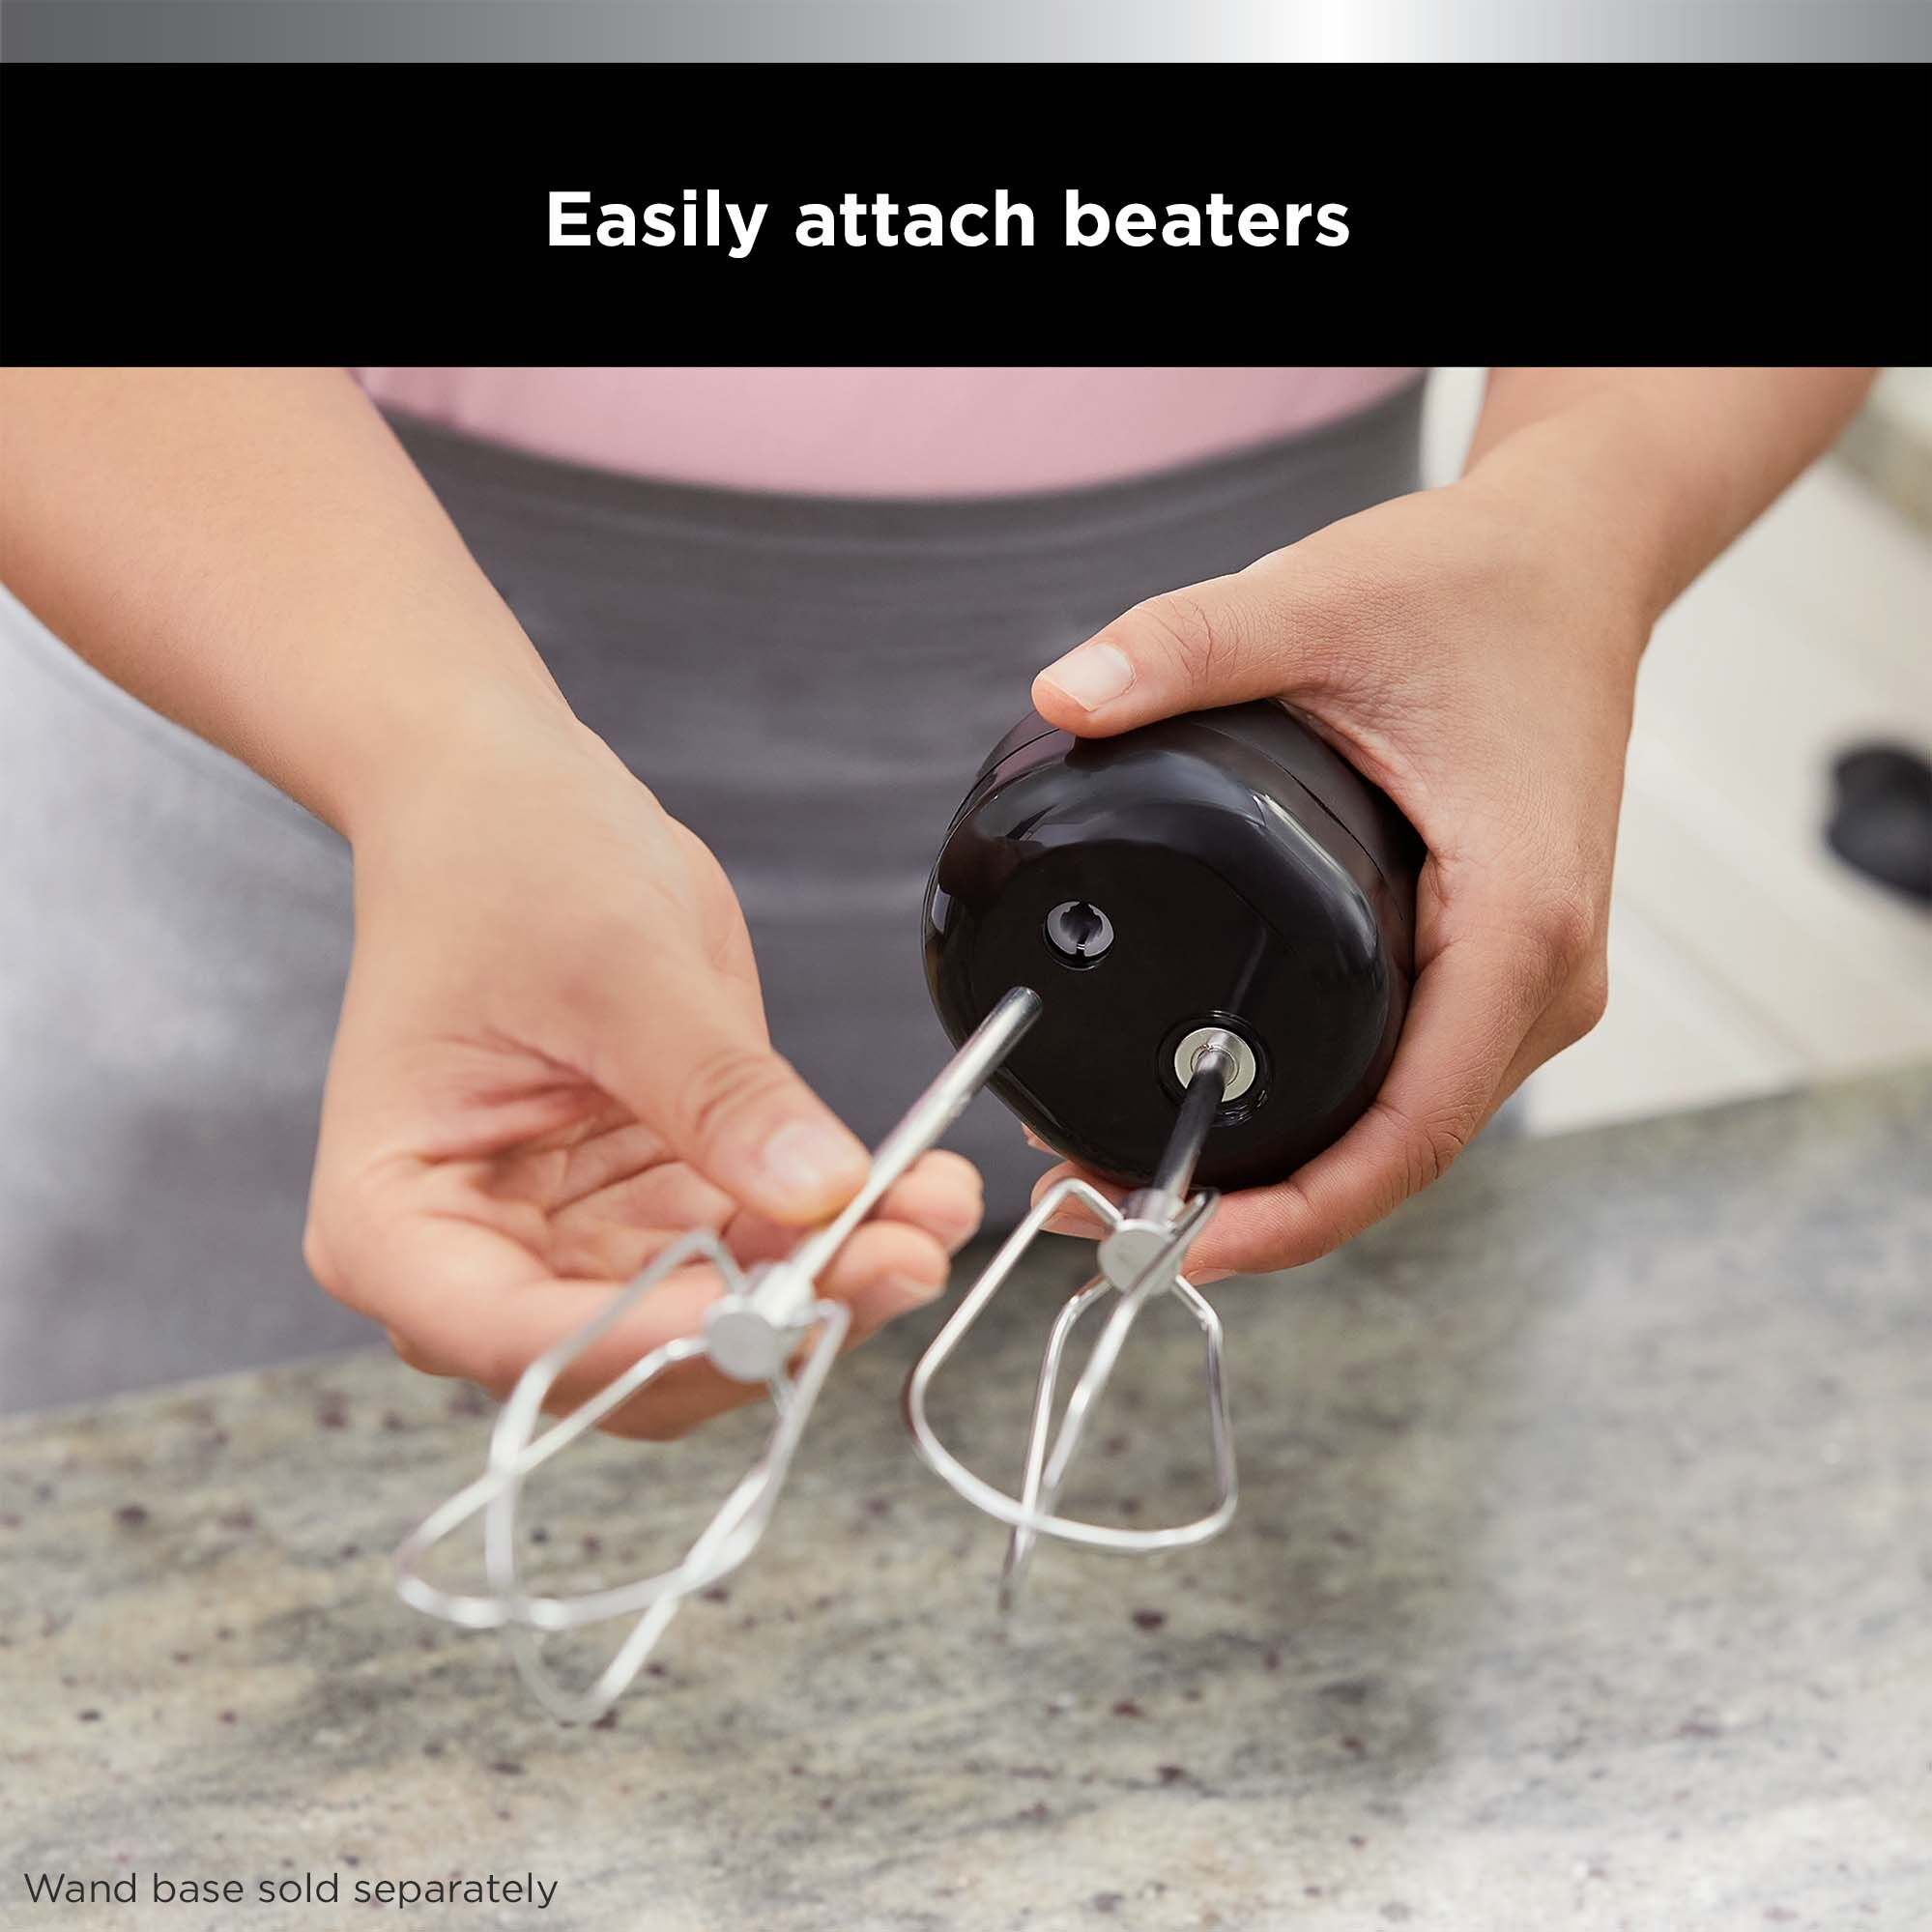 Easy to attach the beaters to the BLACK+DECKER kitchen wand™ hand mixer attachment, ensure they are secure with a click